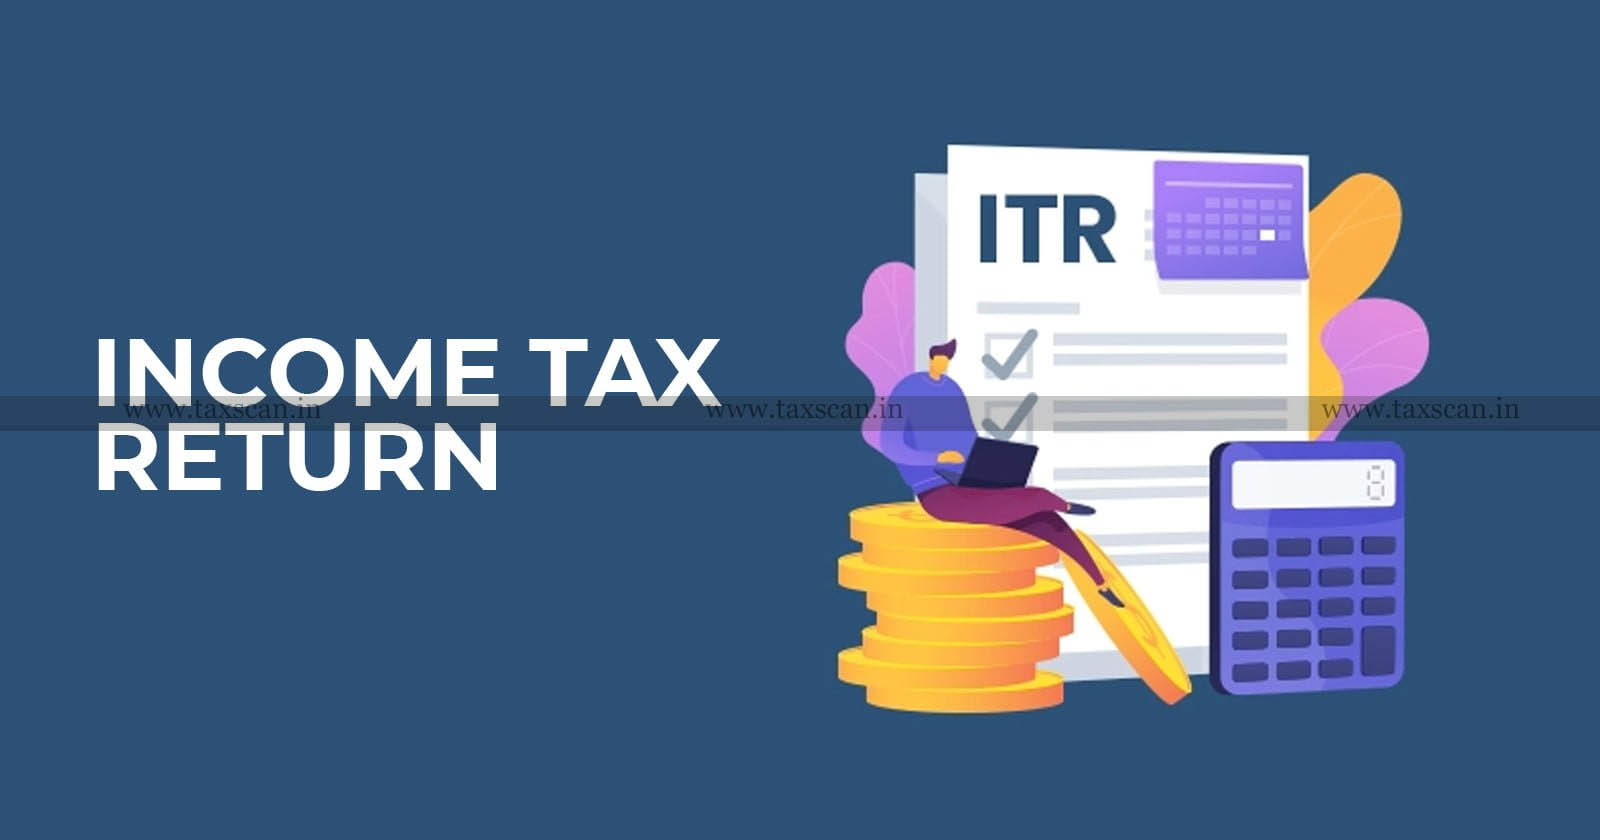 Should you file income tax returns in April or wait until July 31? Here’s what experts say